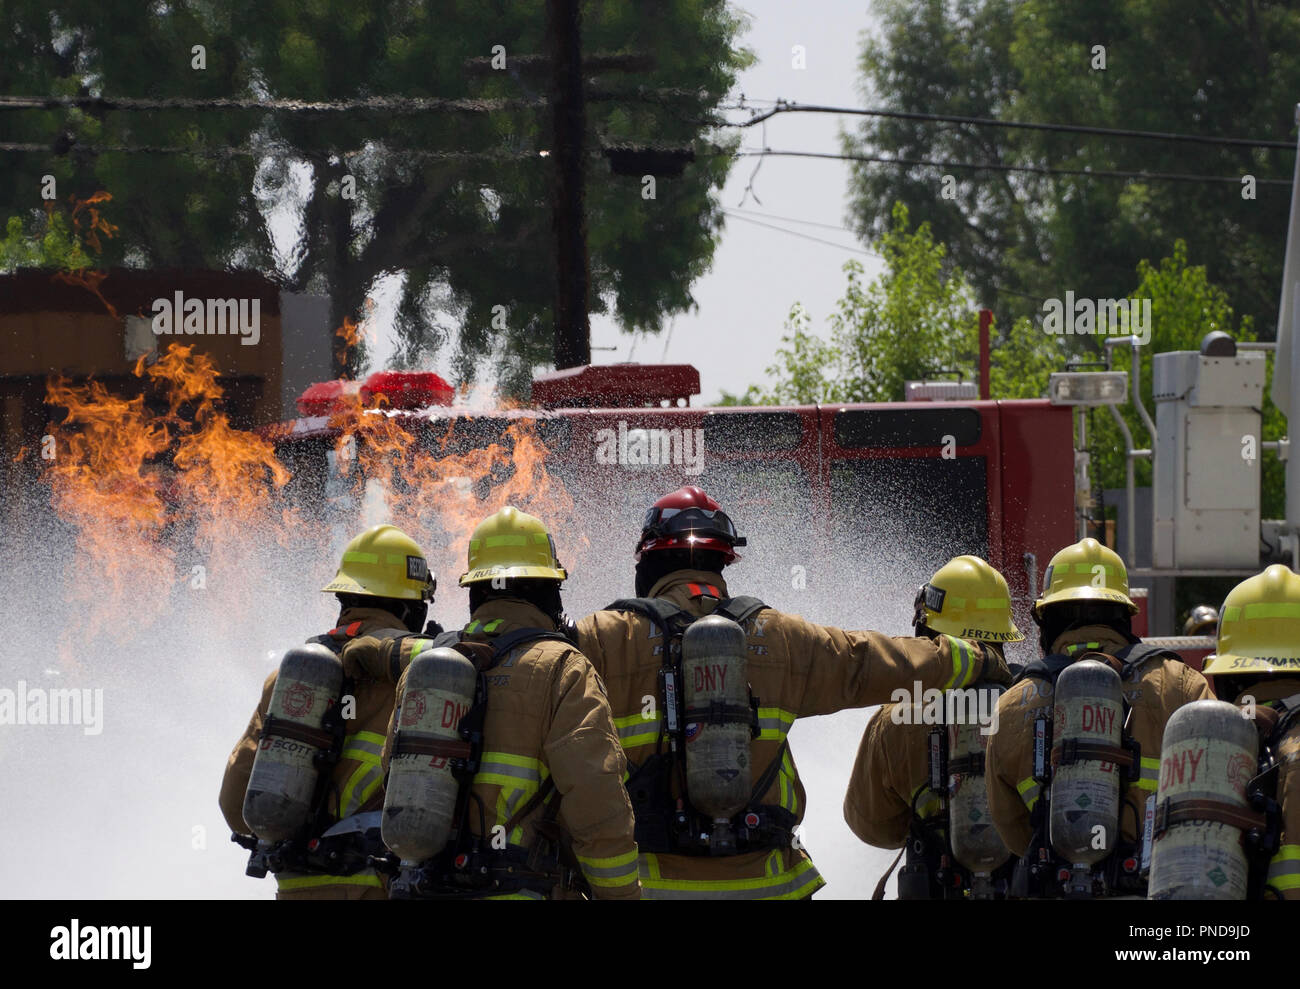 Firemen working together to put out a fire in Downey, CA in 2017 Stock Photo